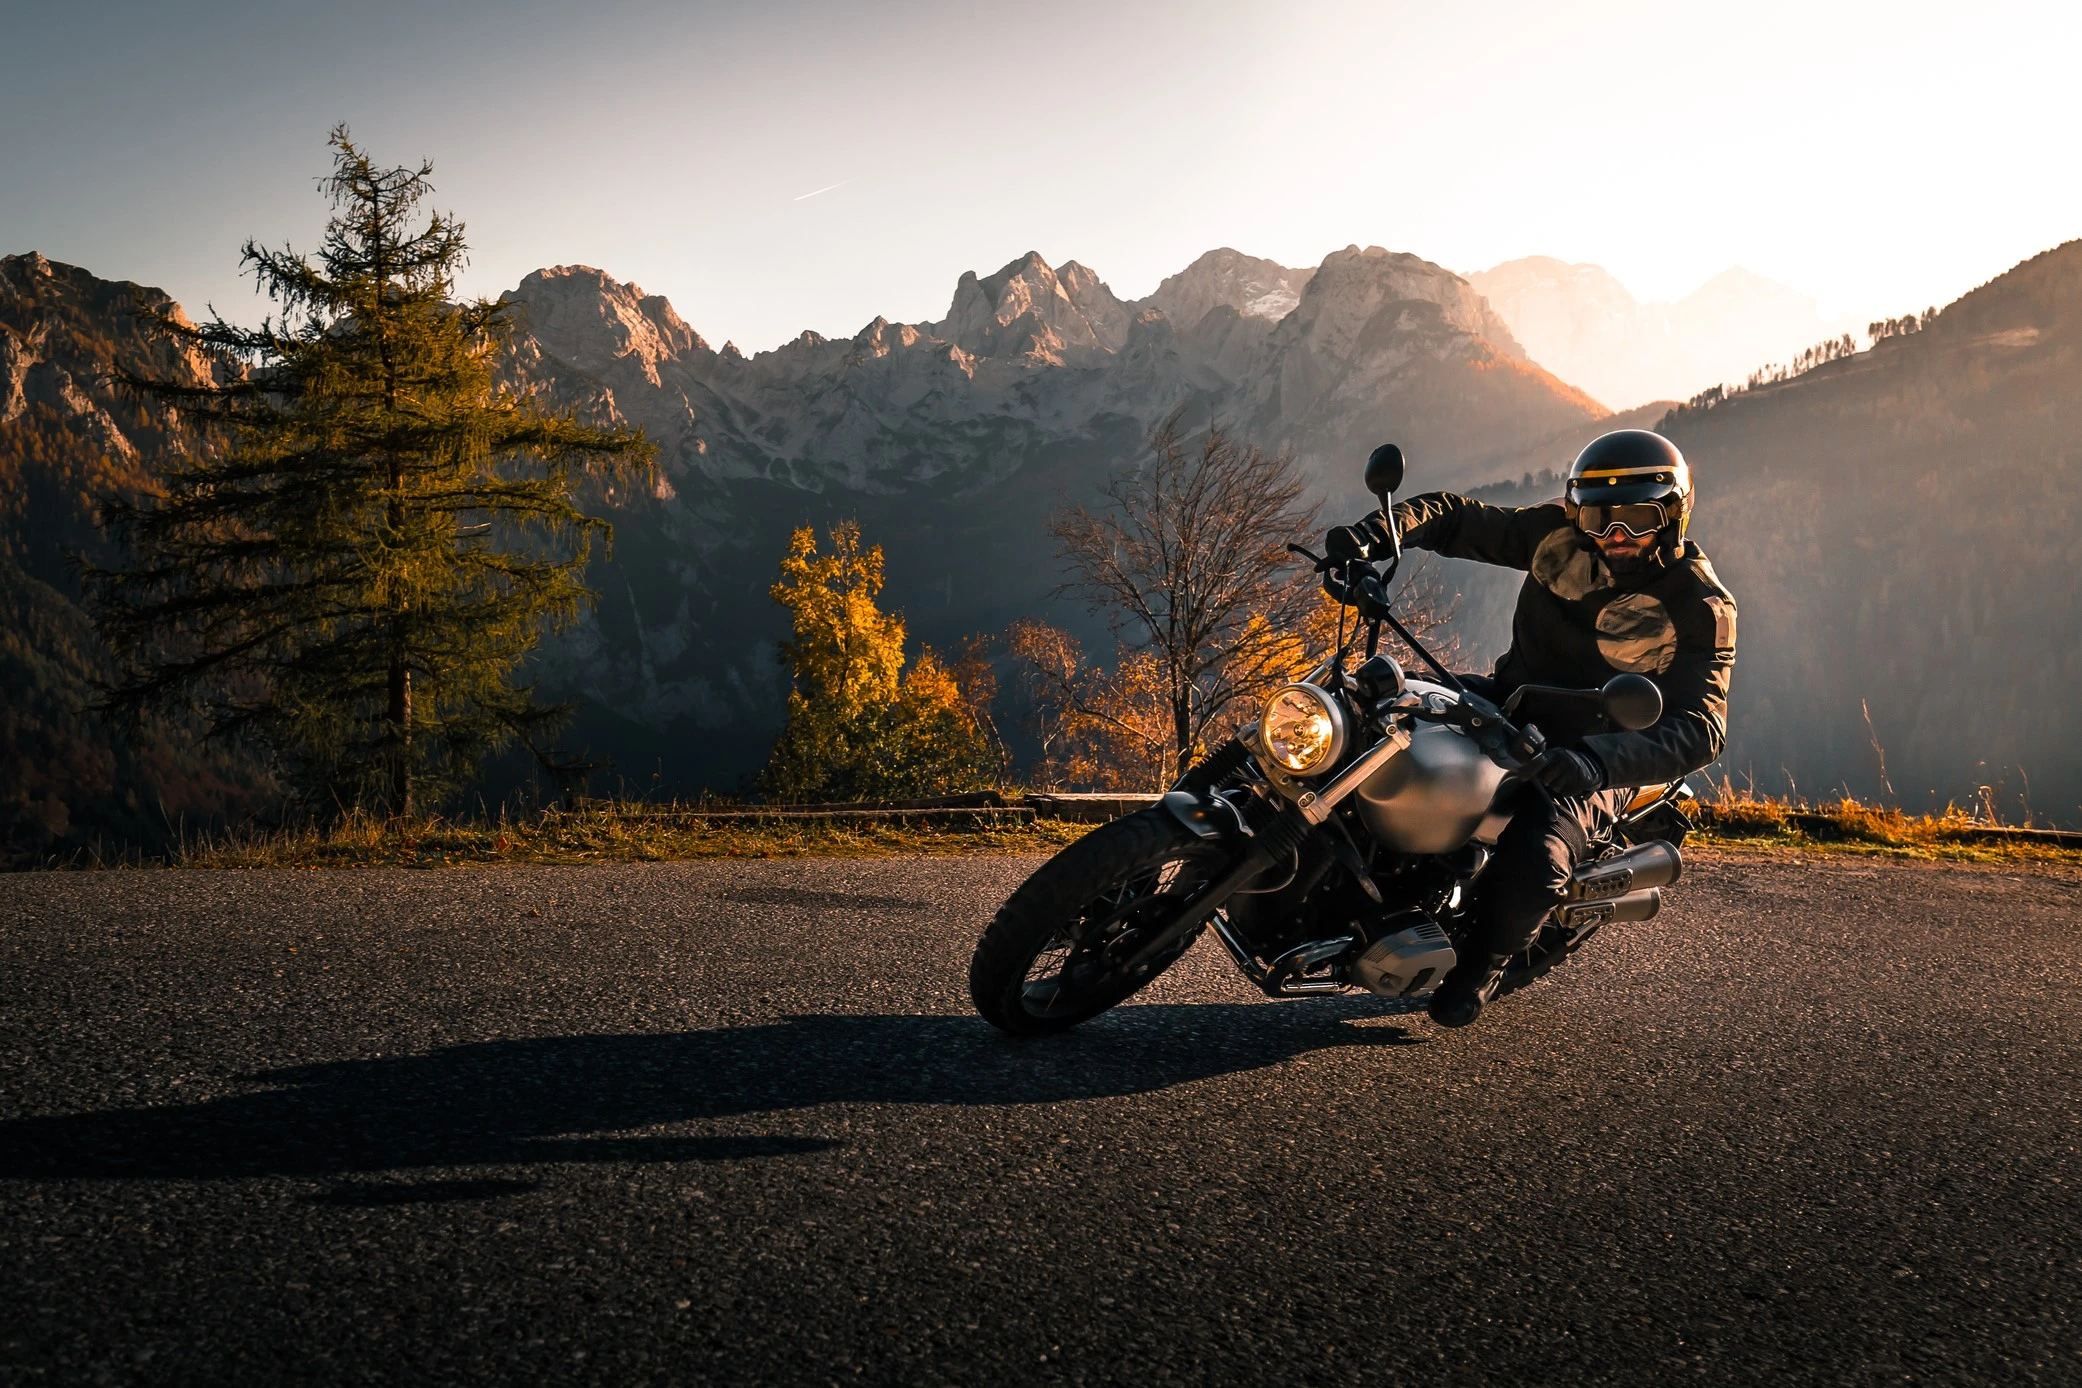 How to choose the best motorcycle?